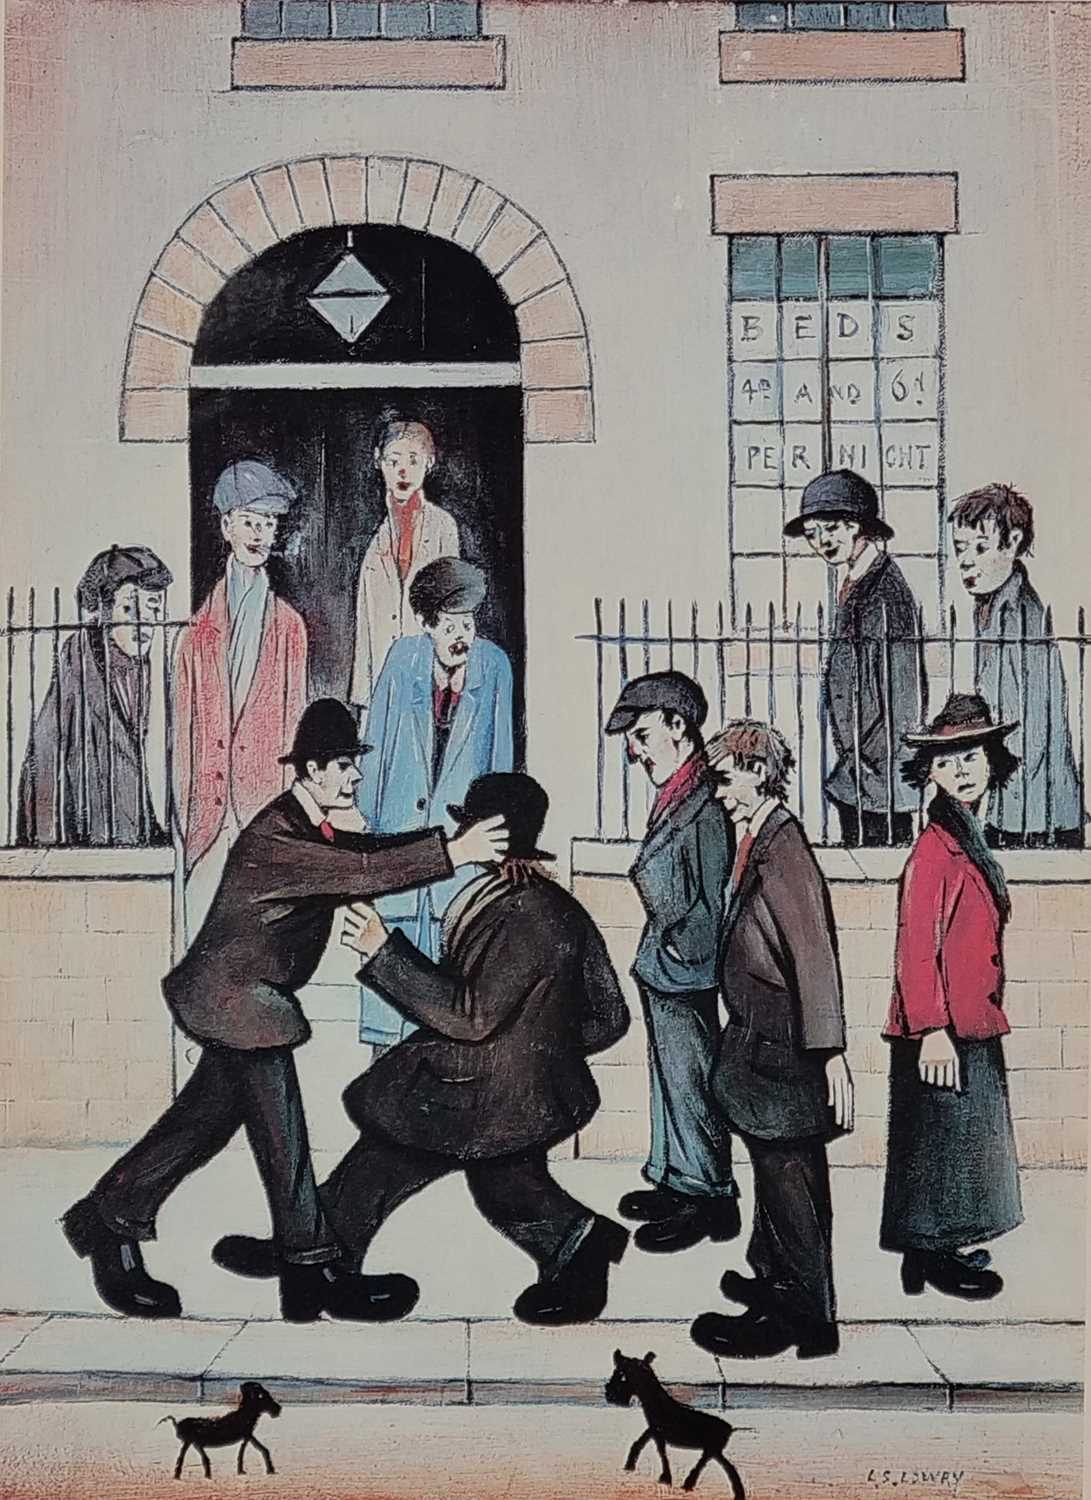 ƚ Laurence Stephen LOWRY (British 1887-1976) A Fight, Salford, Giclée print, titled on label - Image 7 of 12